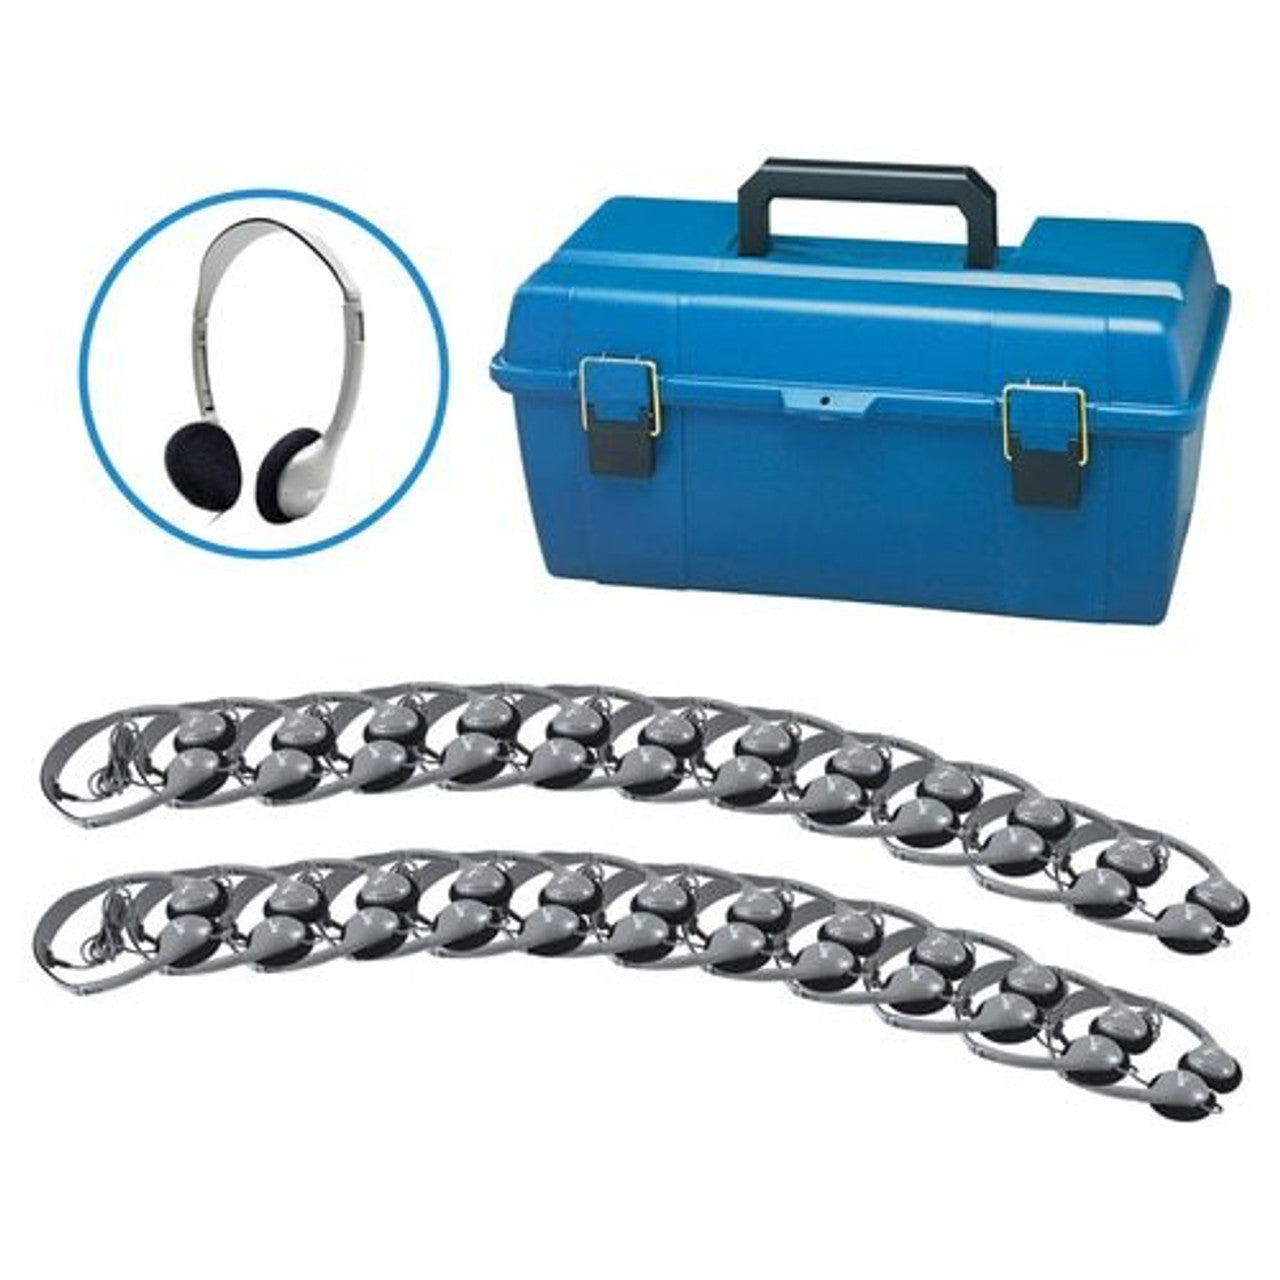 HamiltonBuhl Lab Pack, 24 HA2 Personal Headphones in a Carry Case